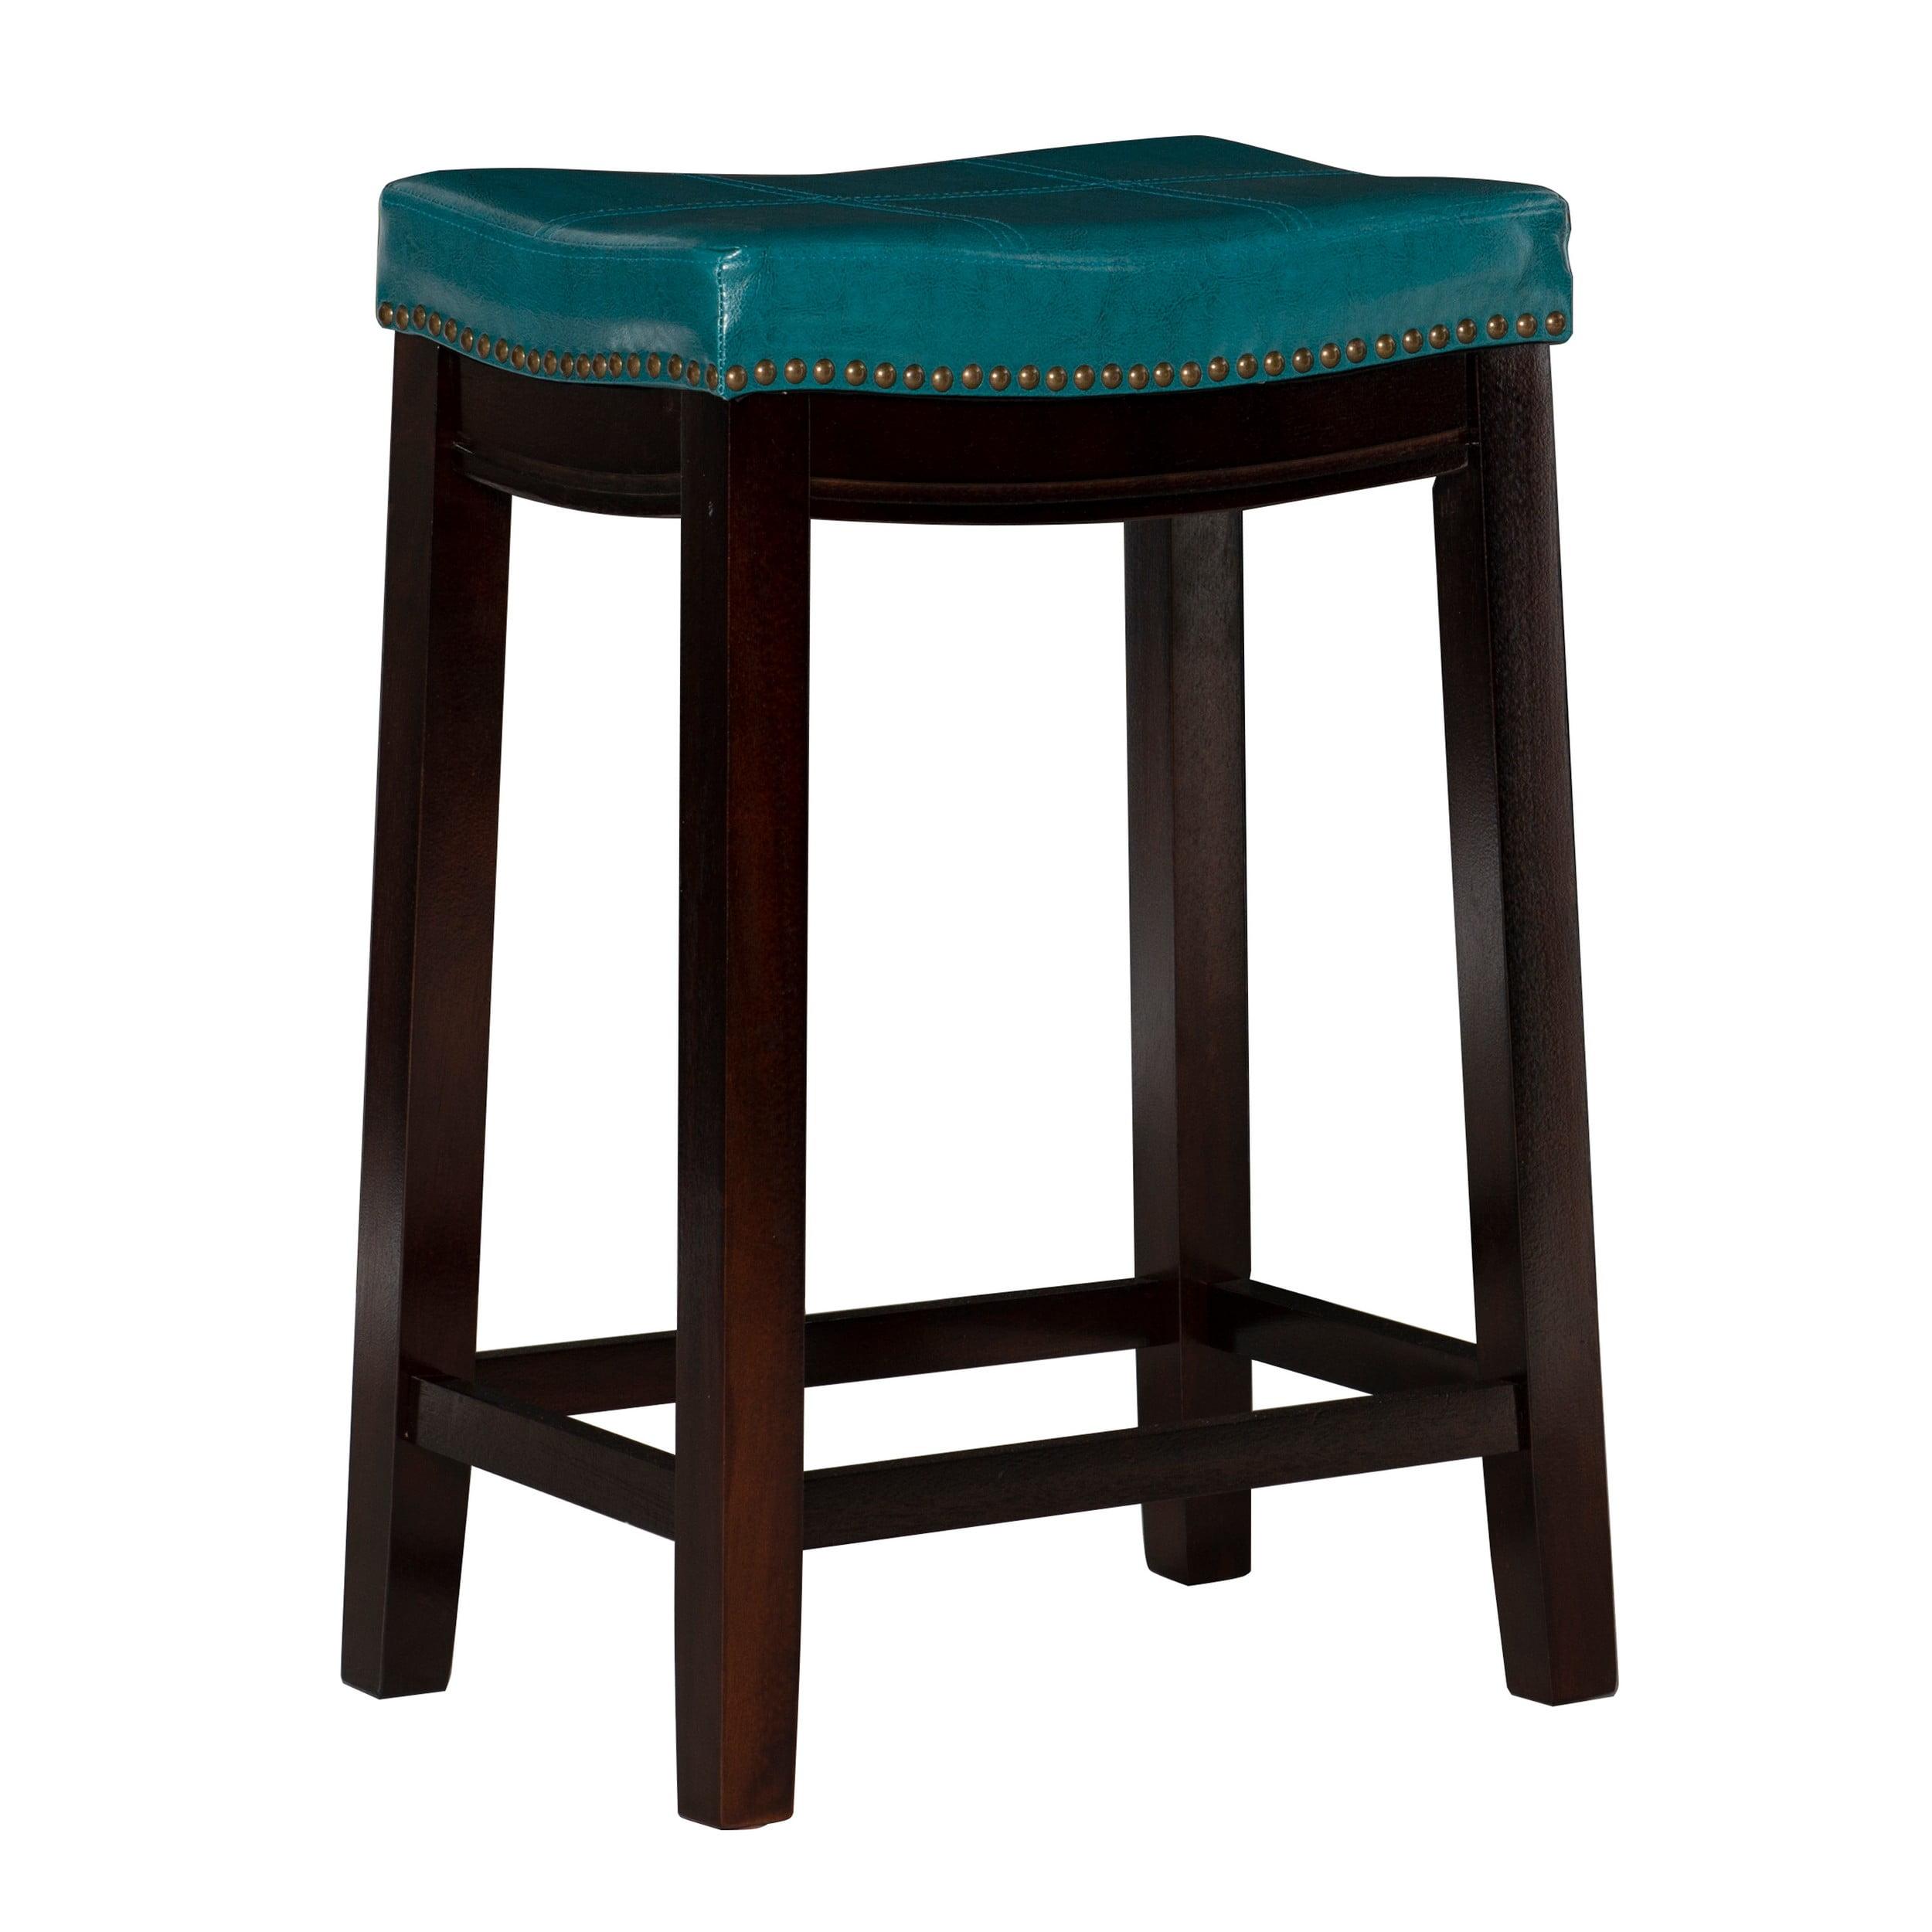 Claridge Dark Brown Wood and Blue Leather 26" Backless Counter Stool